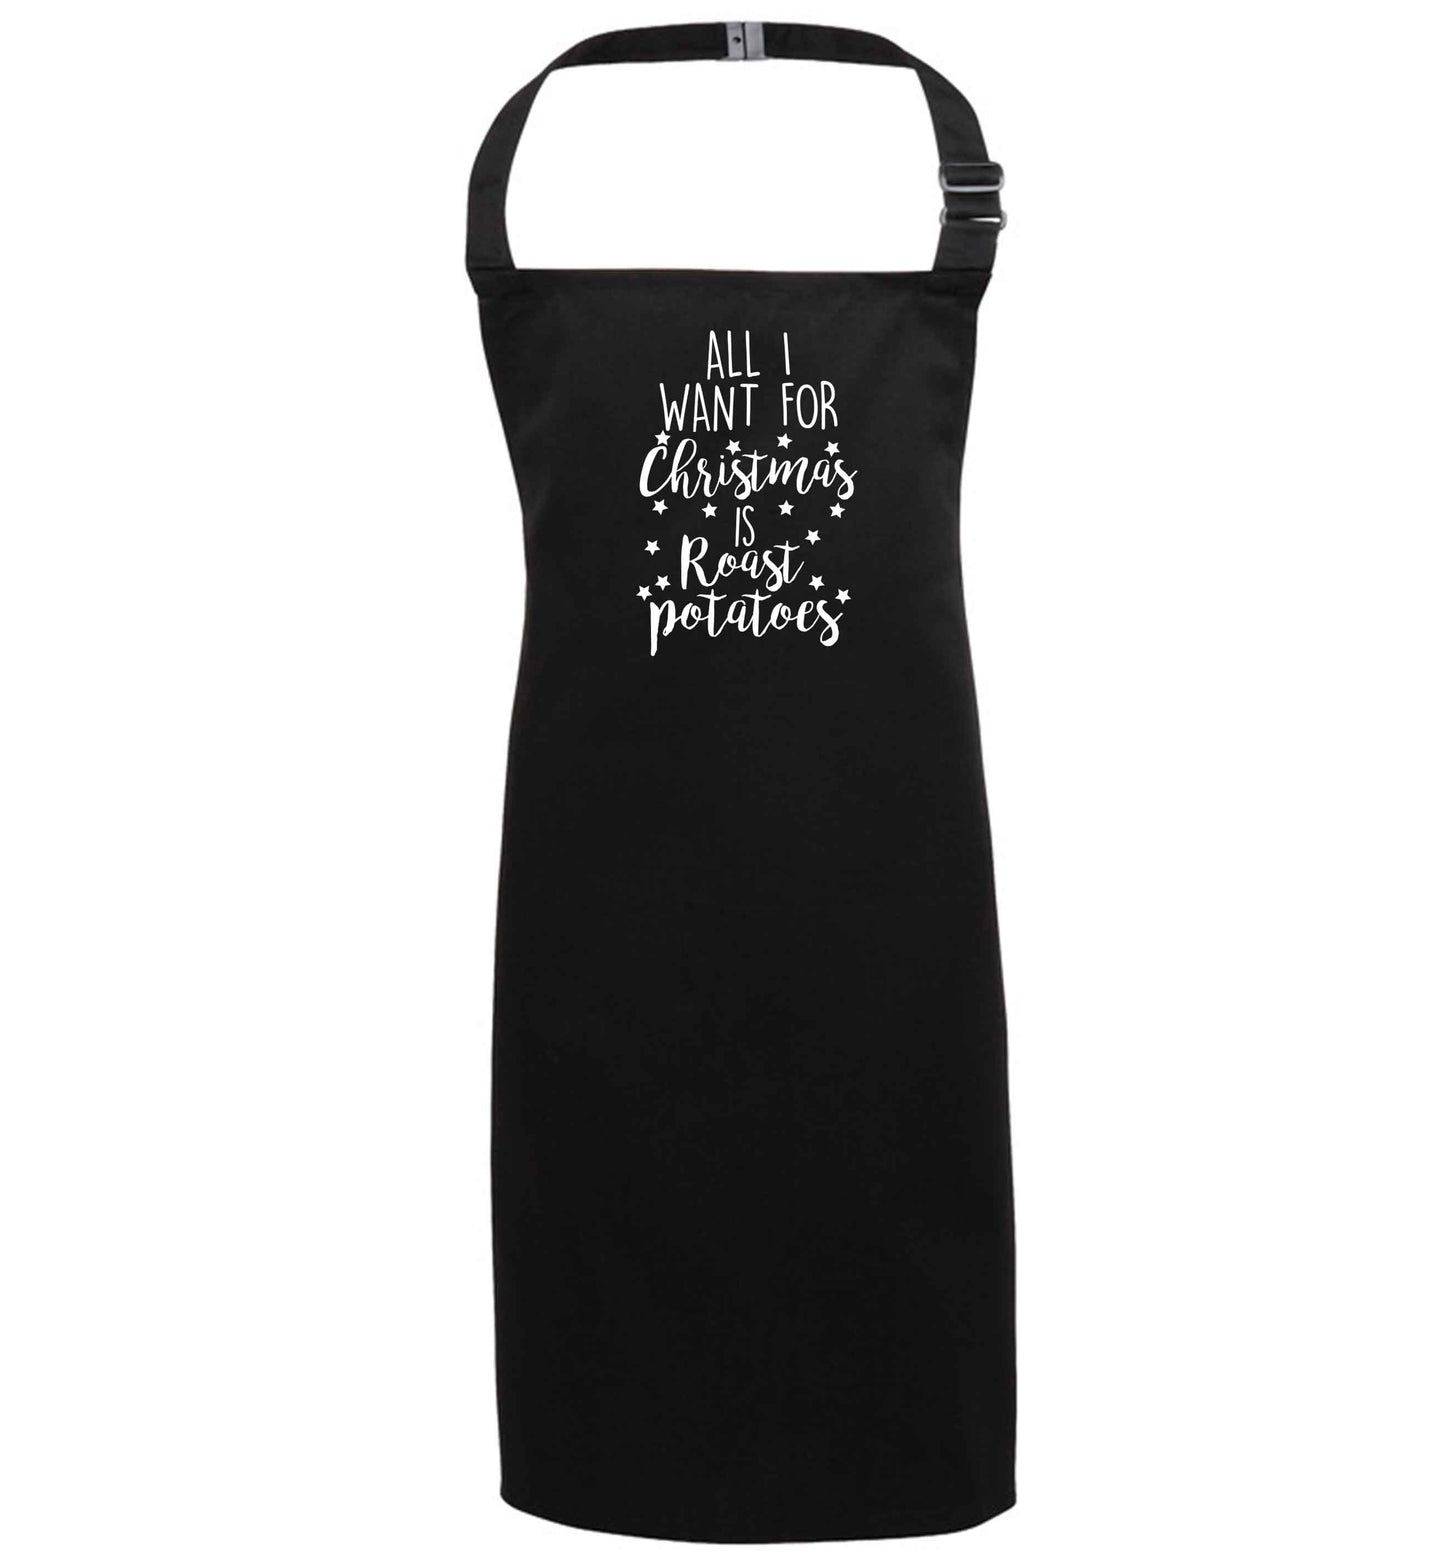 All I want for Christmas is roast potatoes black apron 7-10 years